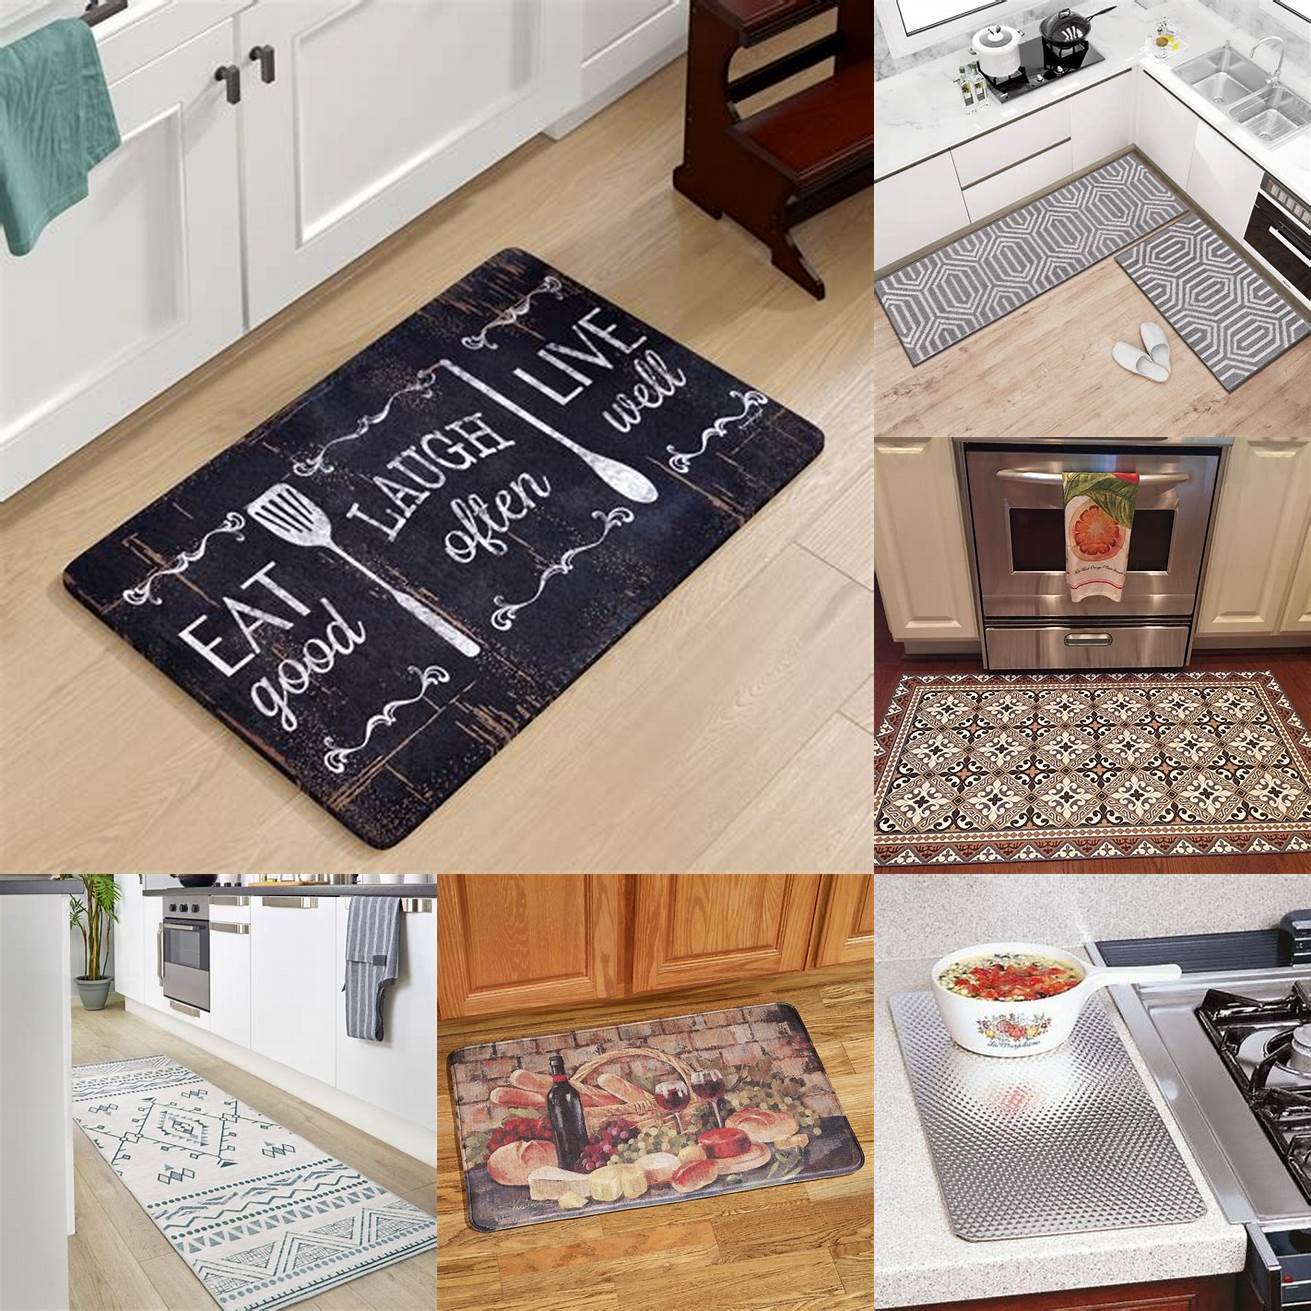 Think about style - Choose a mat that complements your kitchen decor